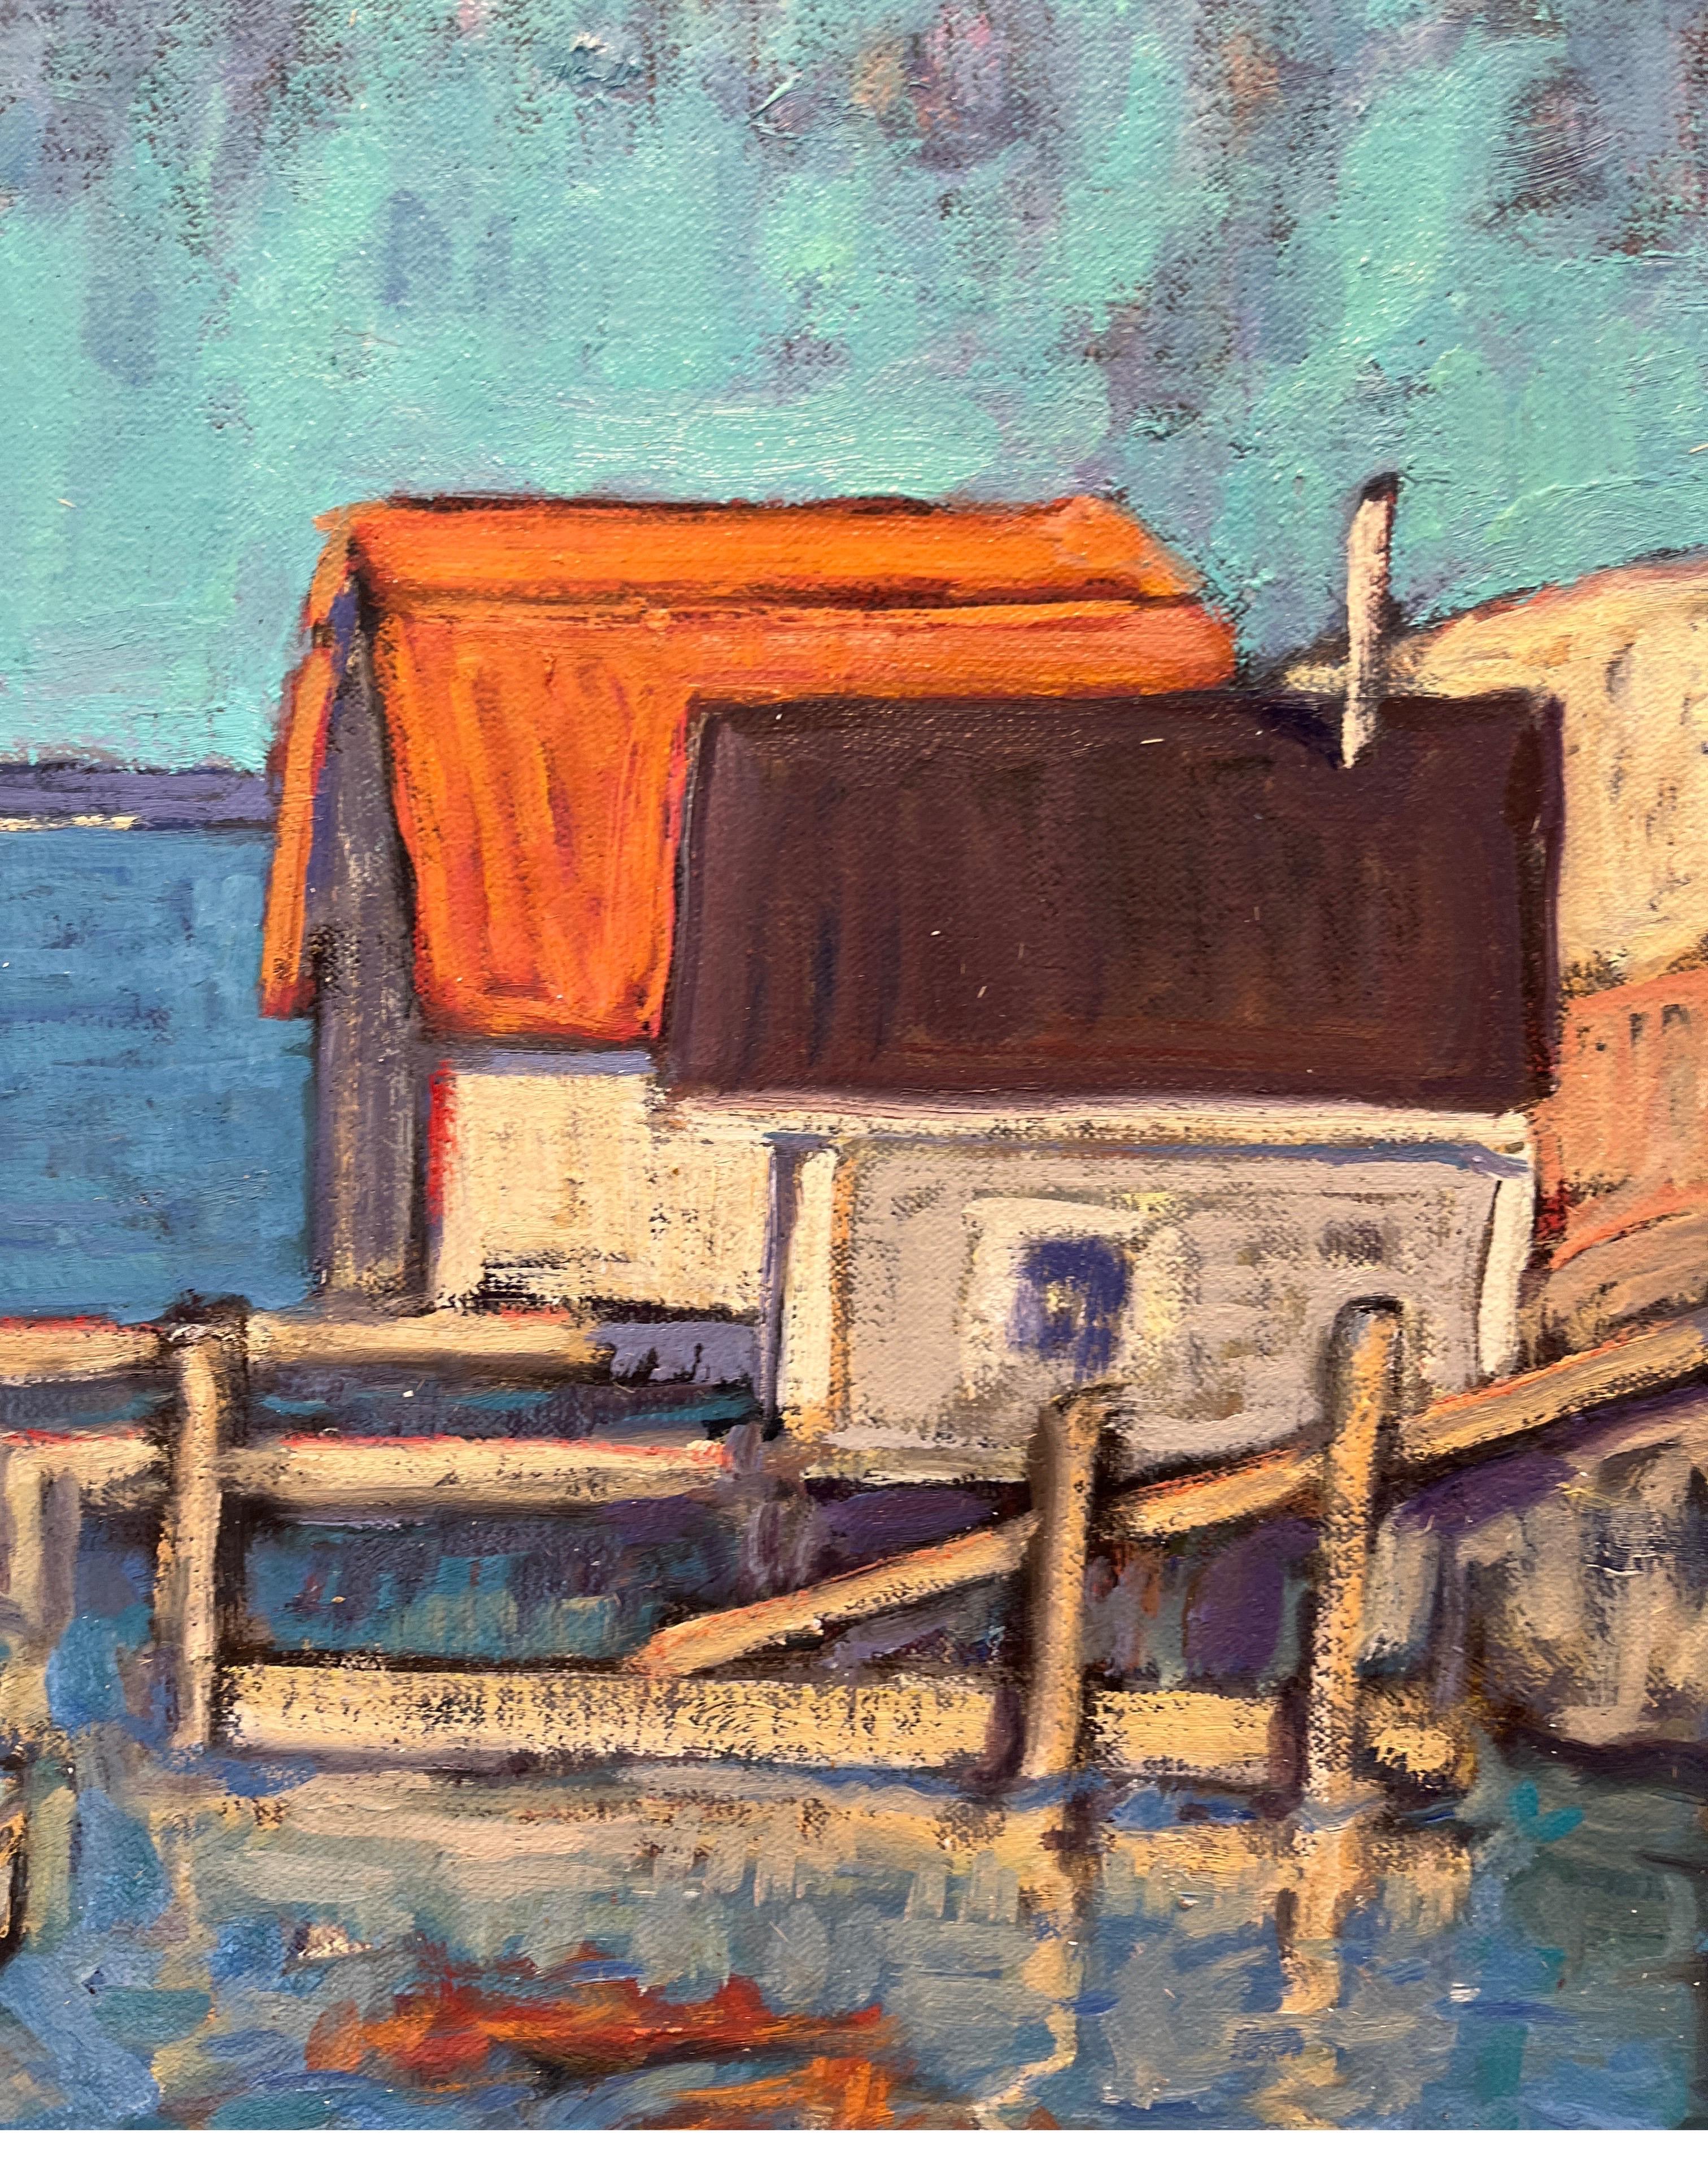 Fishing Village Morning is an original oil painting on linen canvas by established artist Tim McGuire.

To stand before one of Tim McGuire‘s works is to be immersed in a world of colorful energy and vibrant joy. Common objects sing with lively